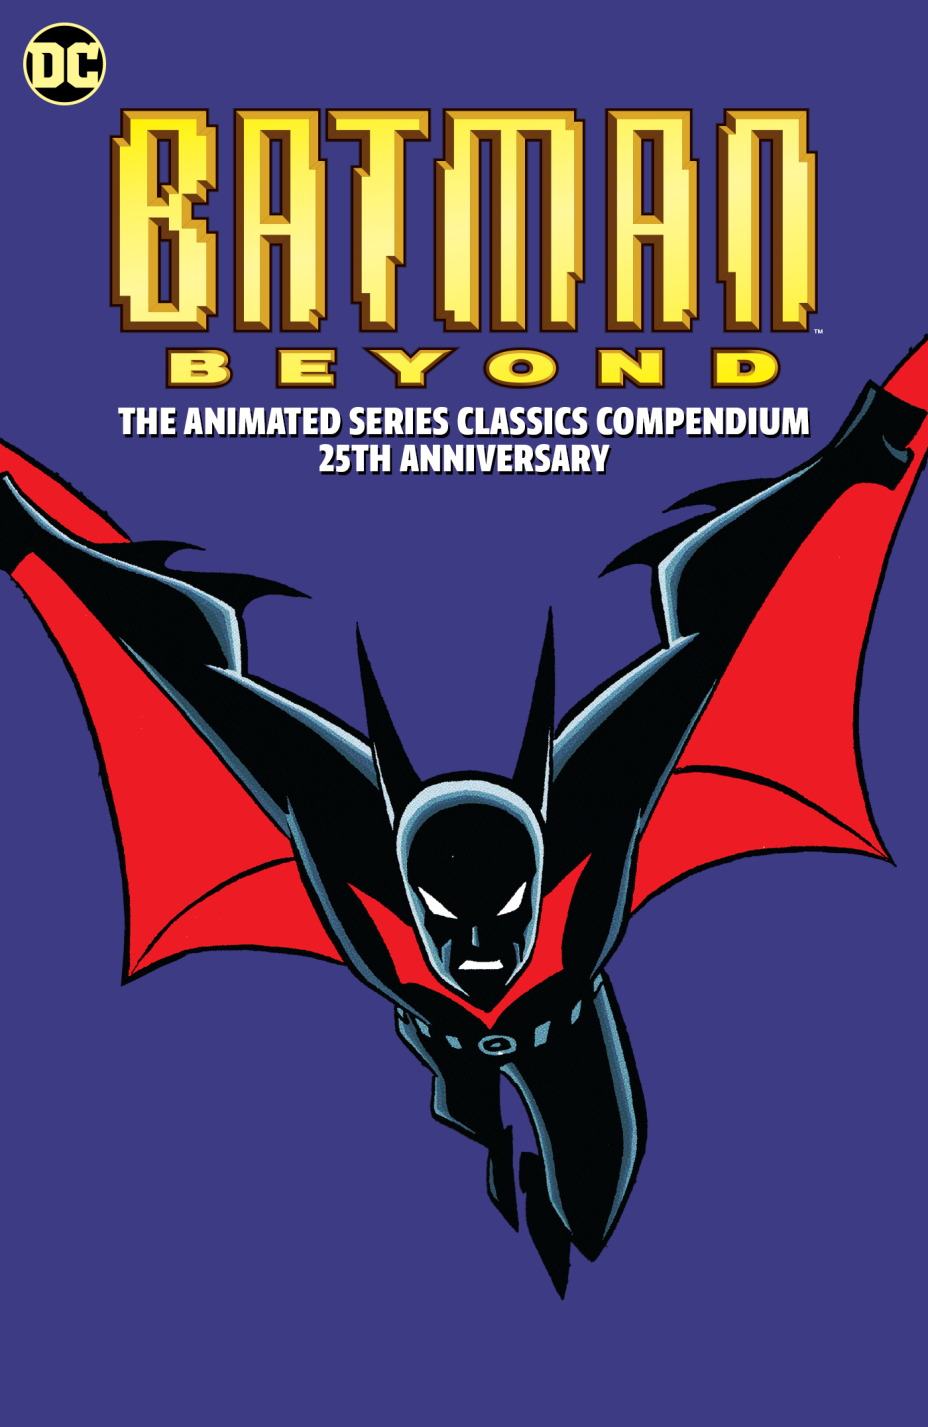 batman-beyond-the-animated-series-classics-compendium-25th-anniversary.png